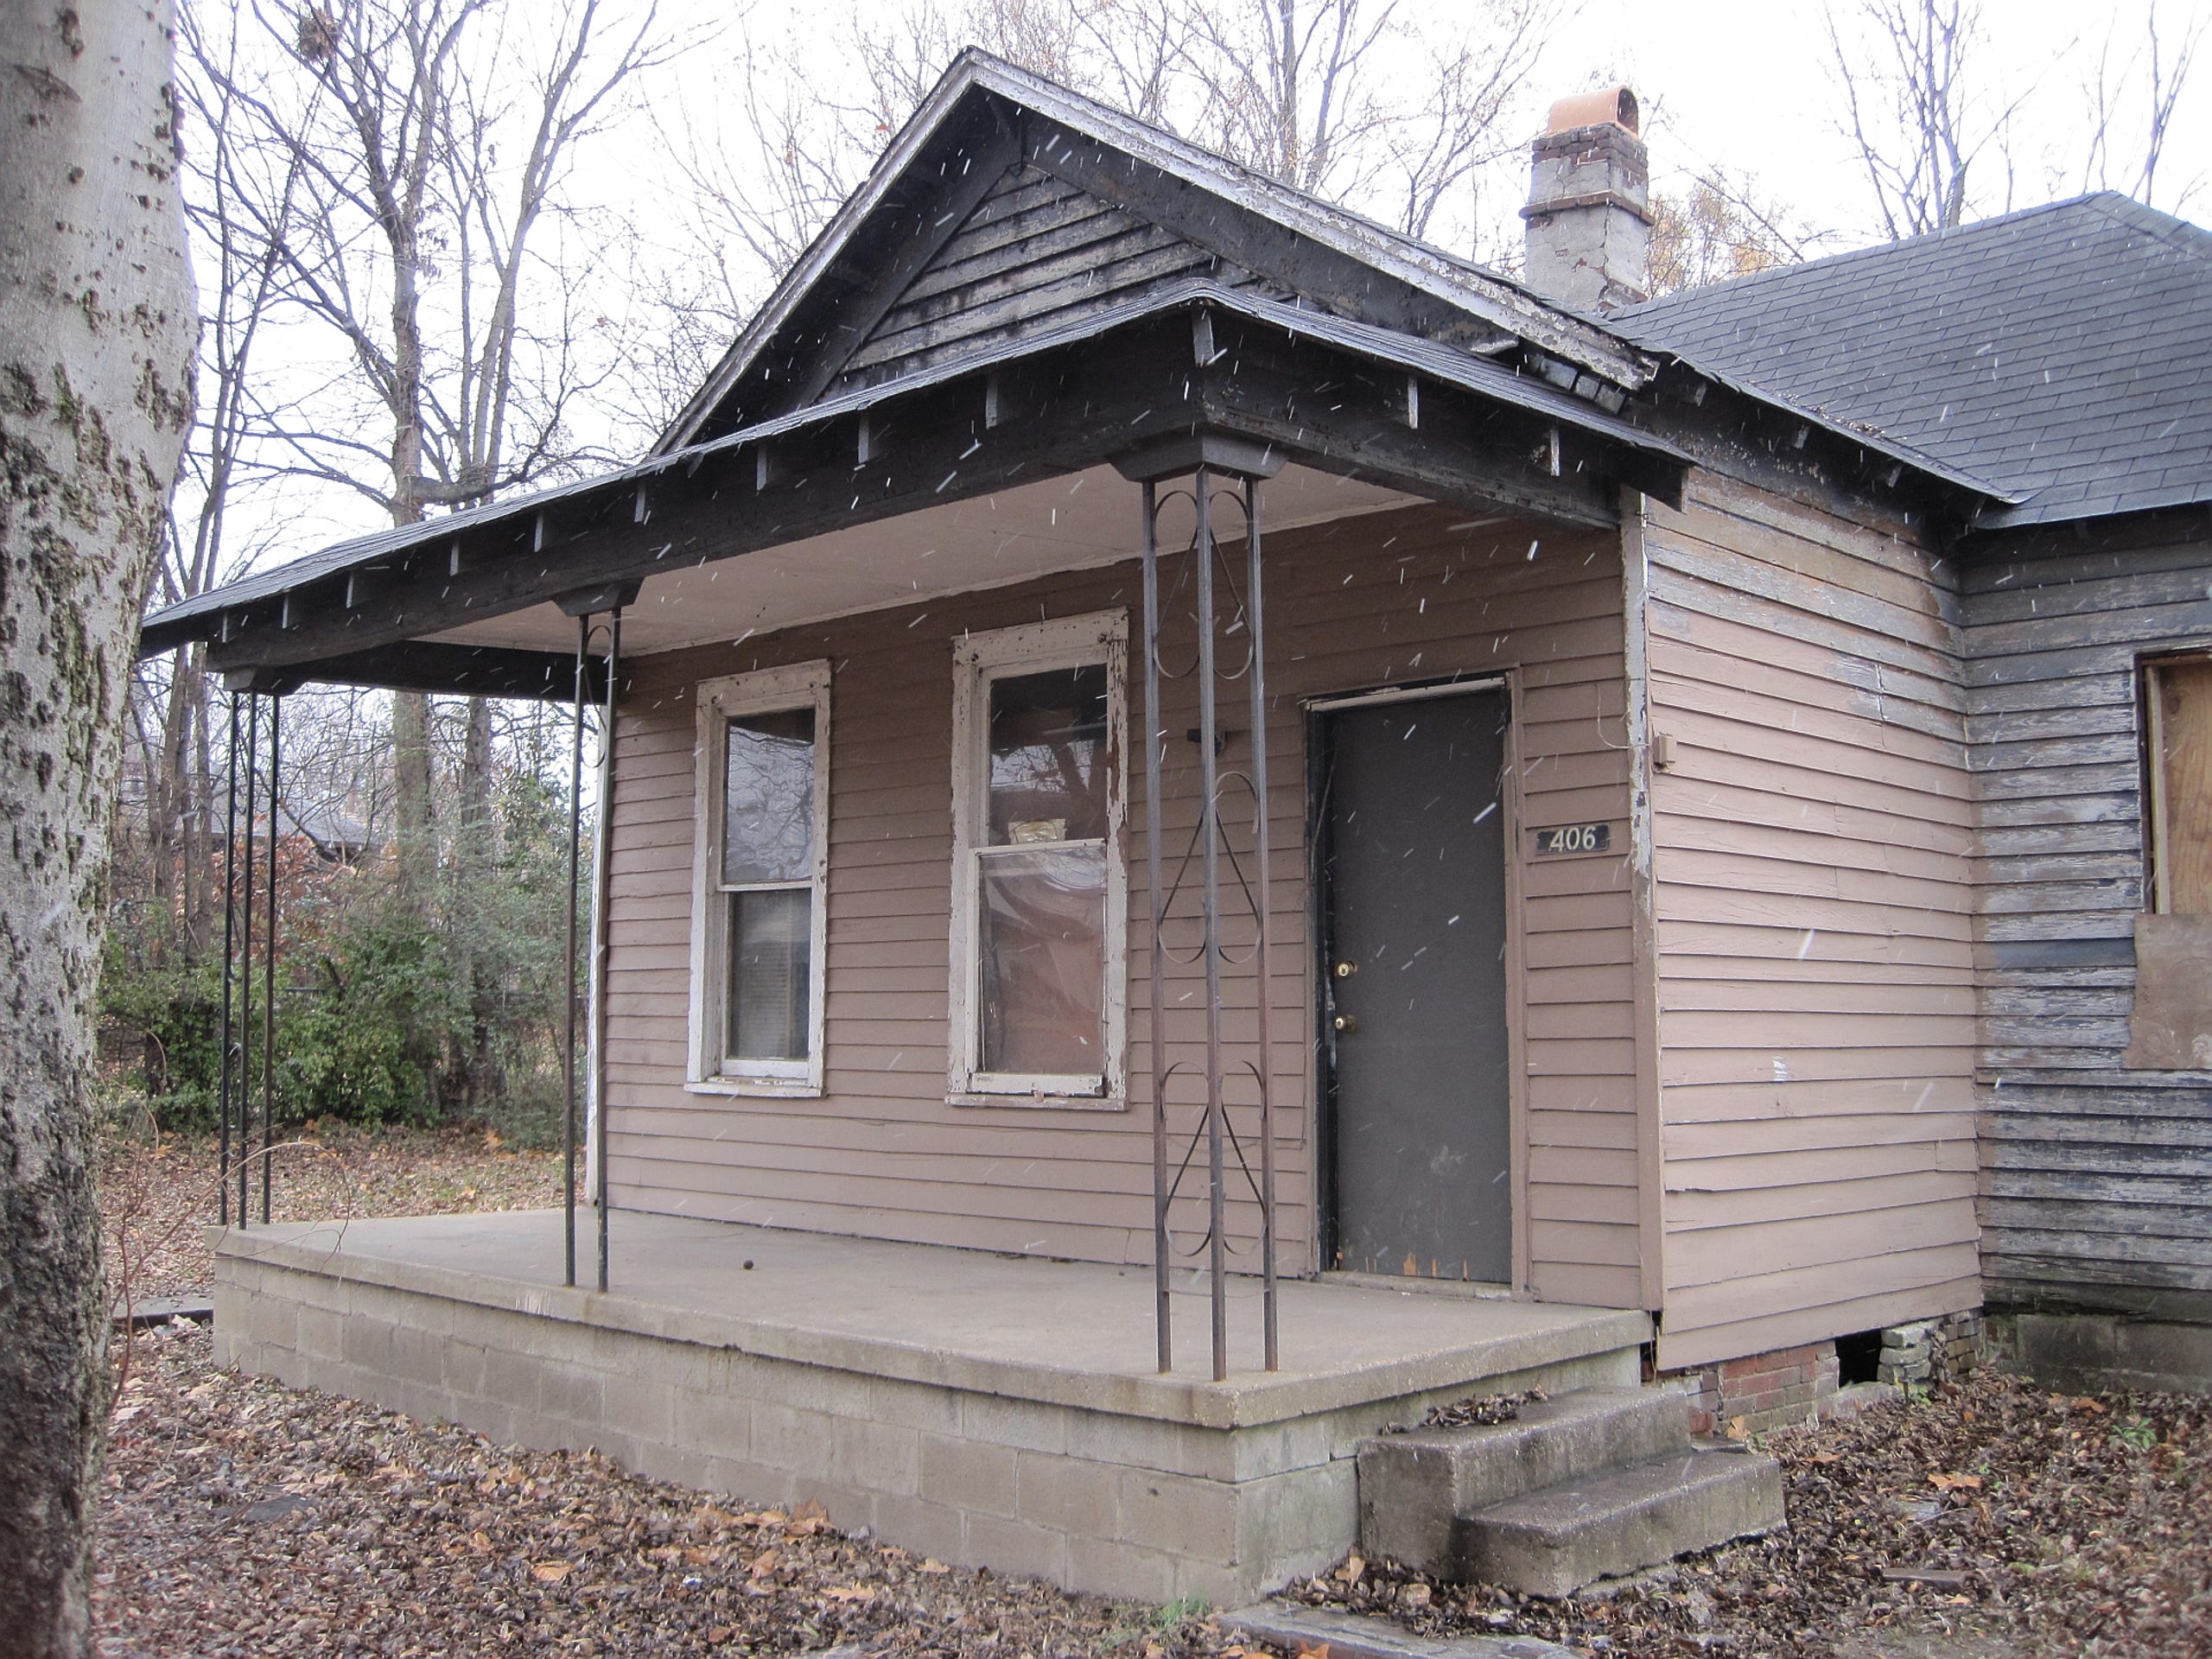 Aretha Franklin birthplace at 406 Lucy Avenue in Memphis, Tennessee. (Snow flurries in the pictures.)